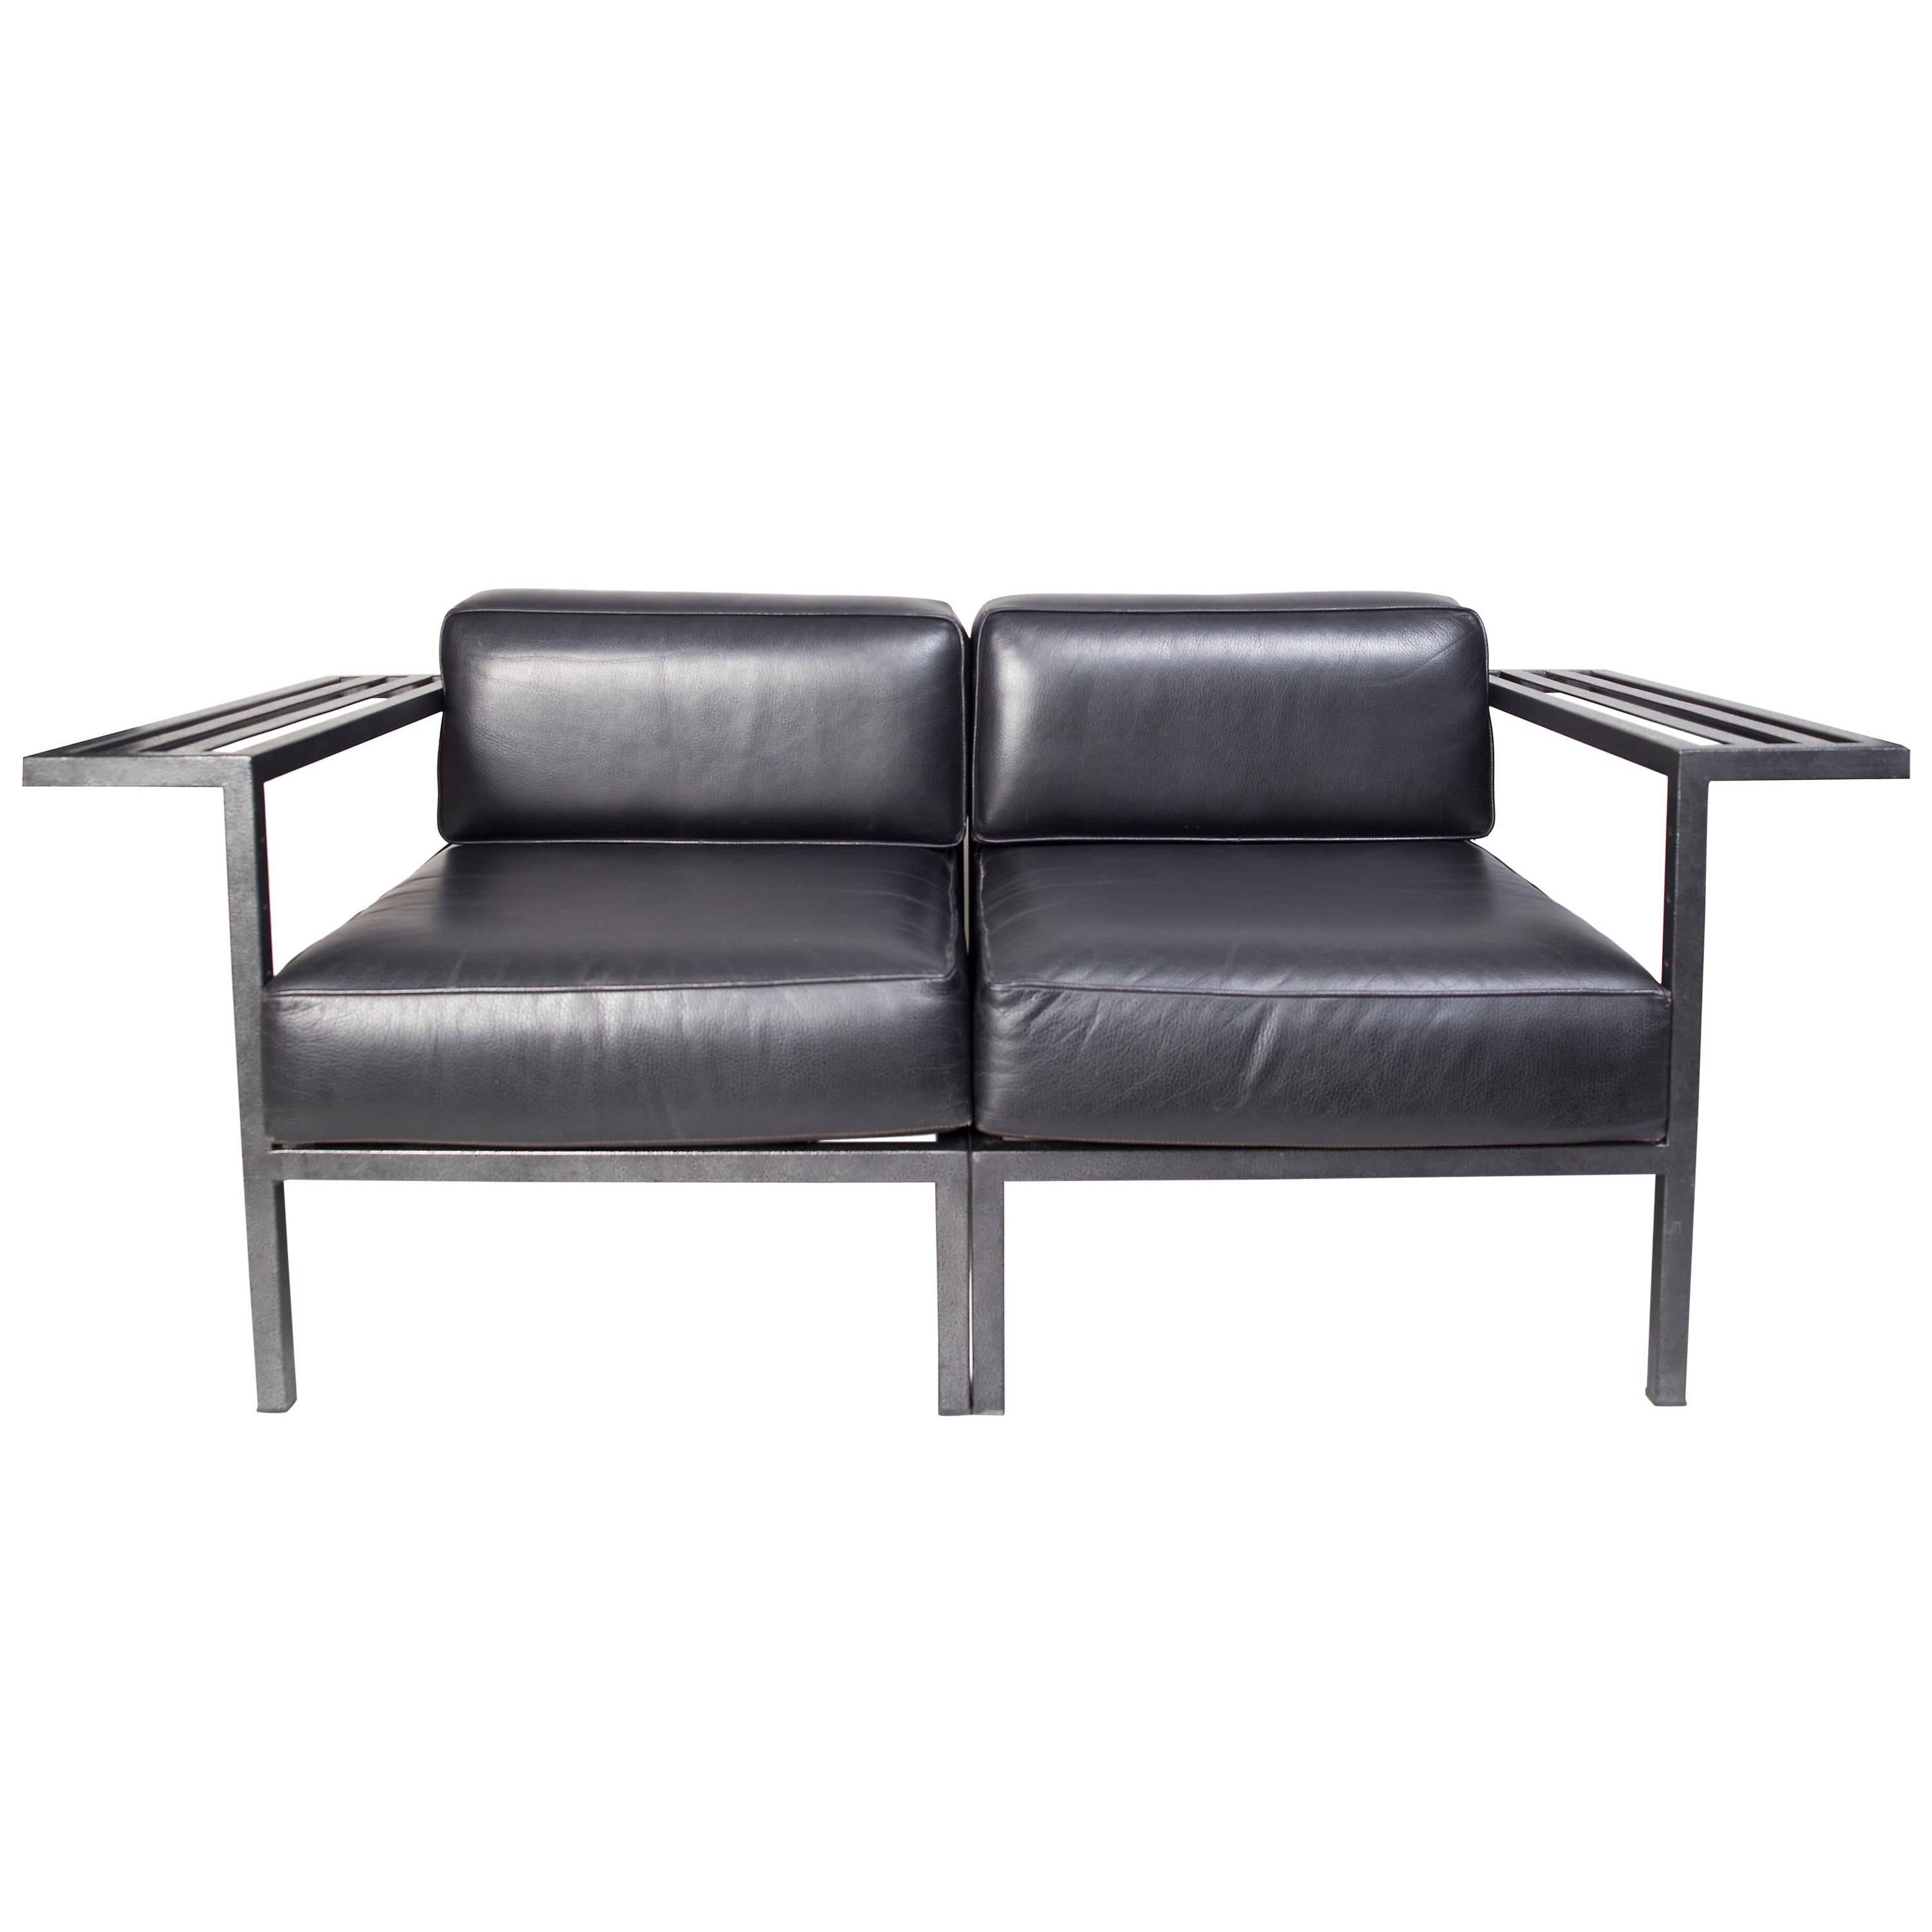 20th Century Pair of French Black Leather Armchairs-Loveseat from the 1980s For Sale